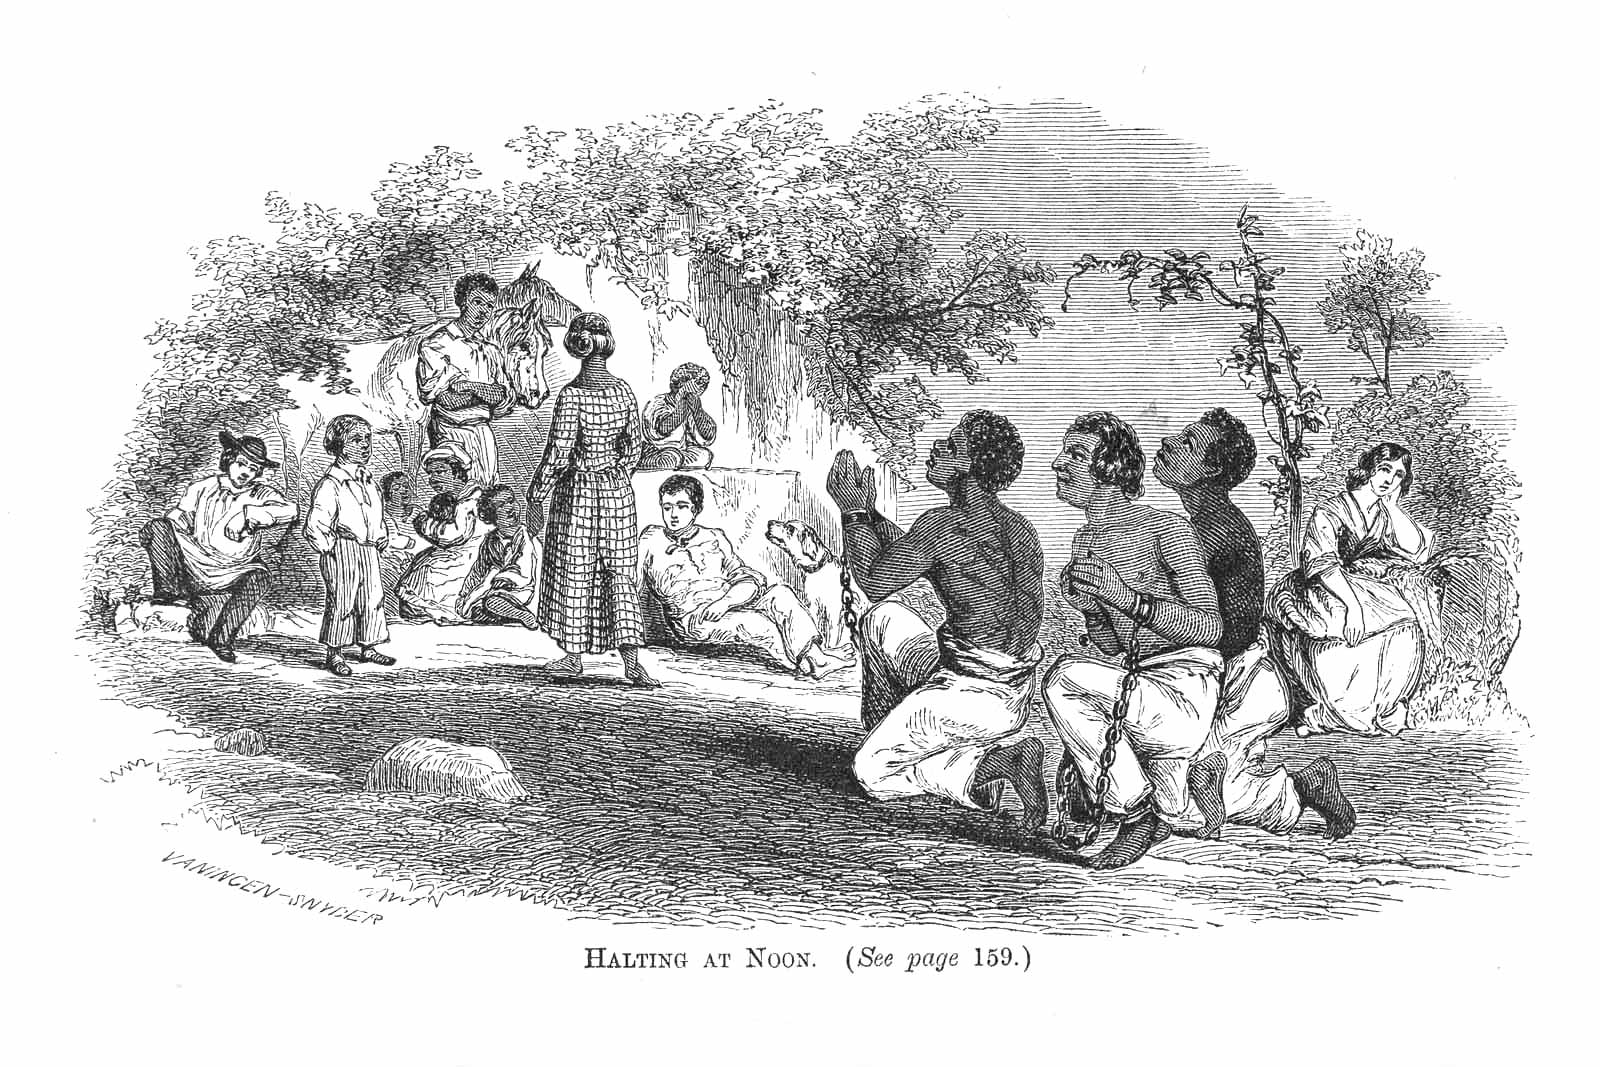 "Halting at Noon," a wood engraving showing a slave drive through Virginia in the early nineteenth century, 1864